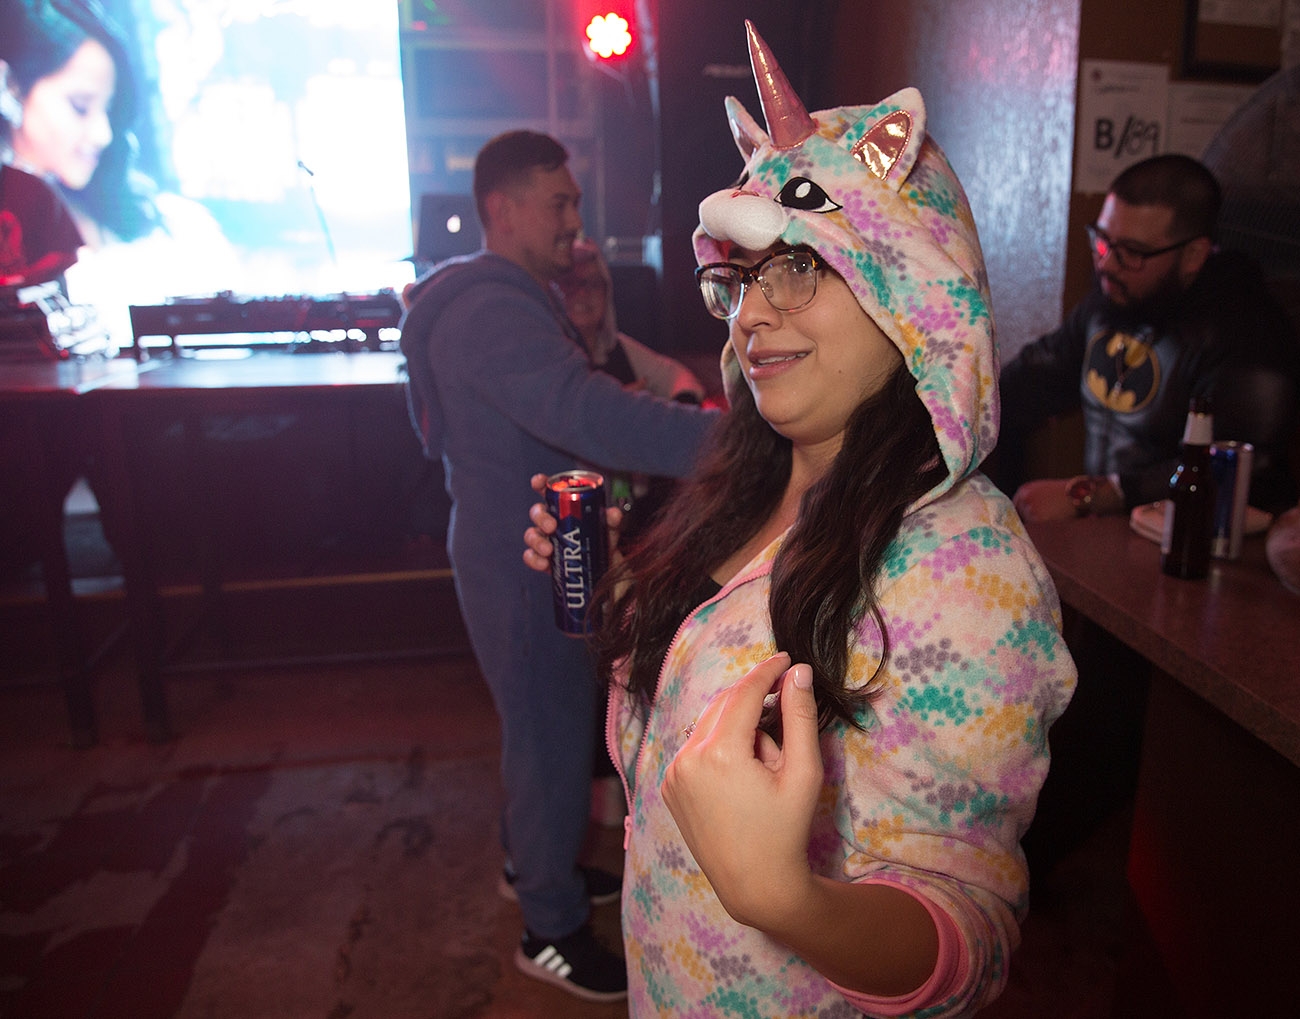 Pub runners have some drinks and bust a few moves during the onesie-themed Pub Run at Moses Rose's Hideout, Jan. 4, 2019. <em><b>Photo by B. Kay Richter | Heron contributor</b></em>